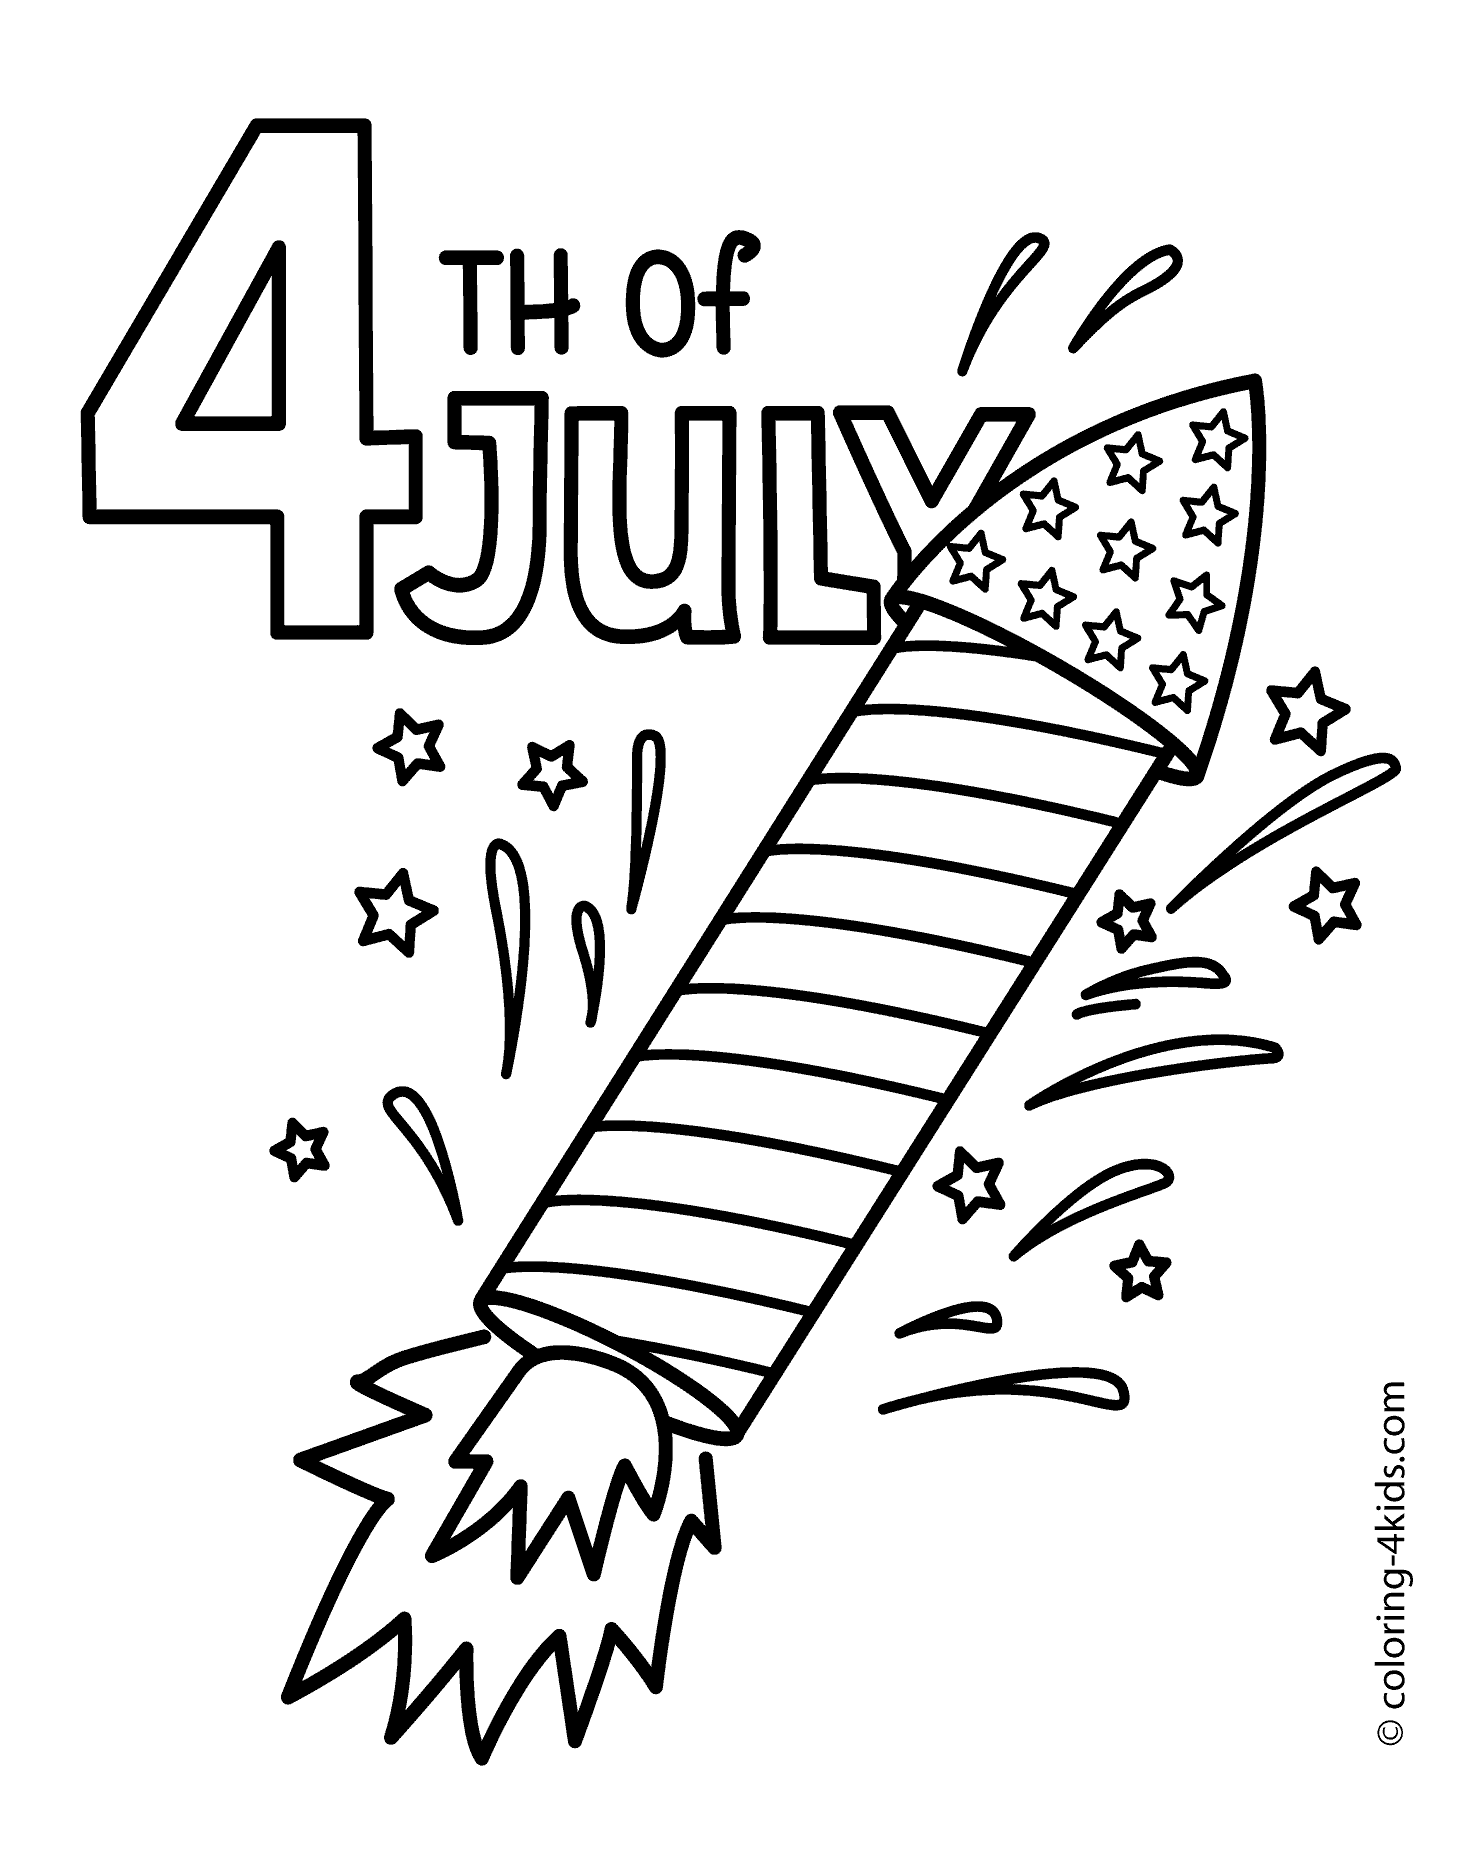 13 independence day coloring pages printable - Print Color Craft